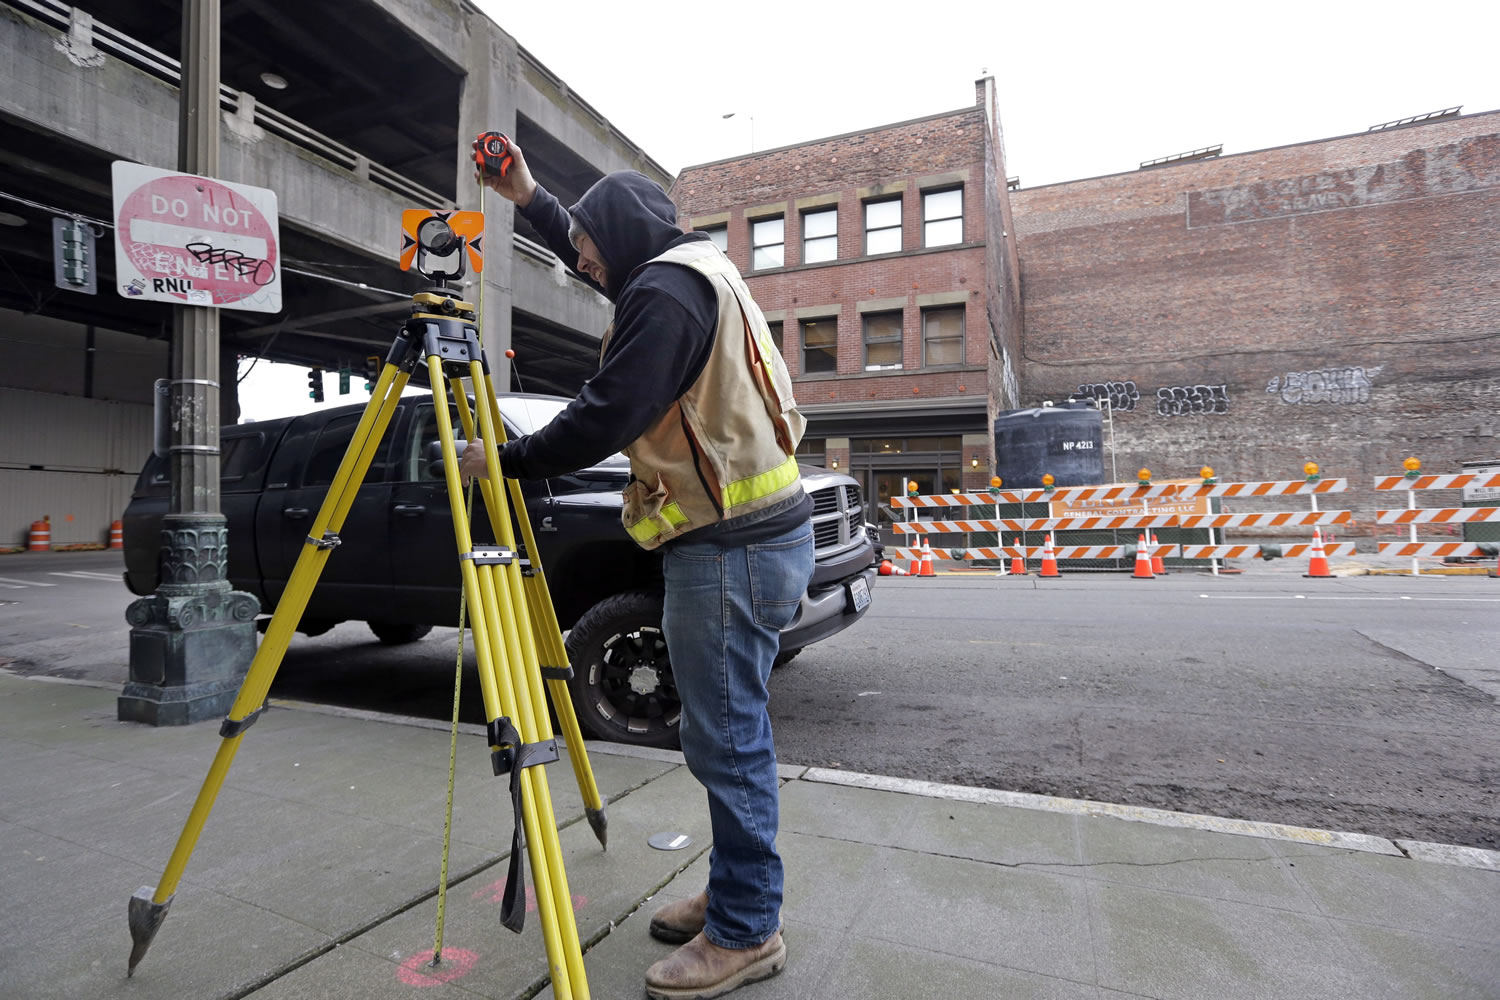 Surveyor Zach Cloe measures at a benchmark for settling of the buildings behind him and next to the Alaskan Way Viaduct, upper left, last week in Seattle.